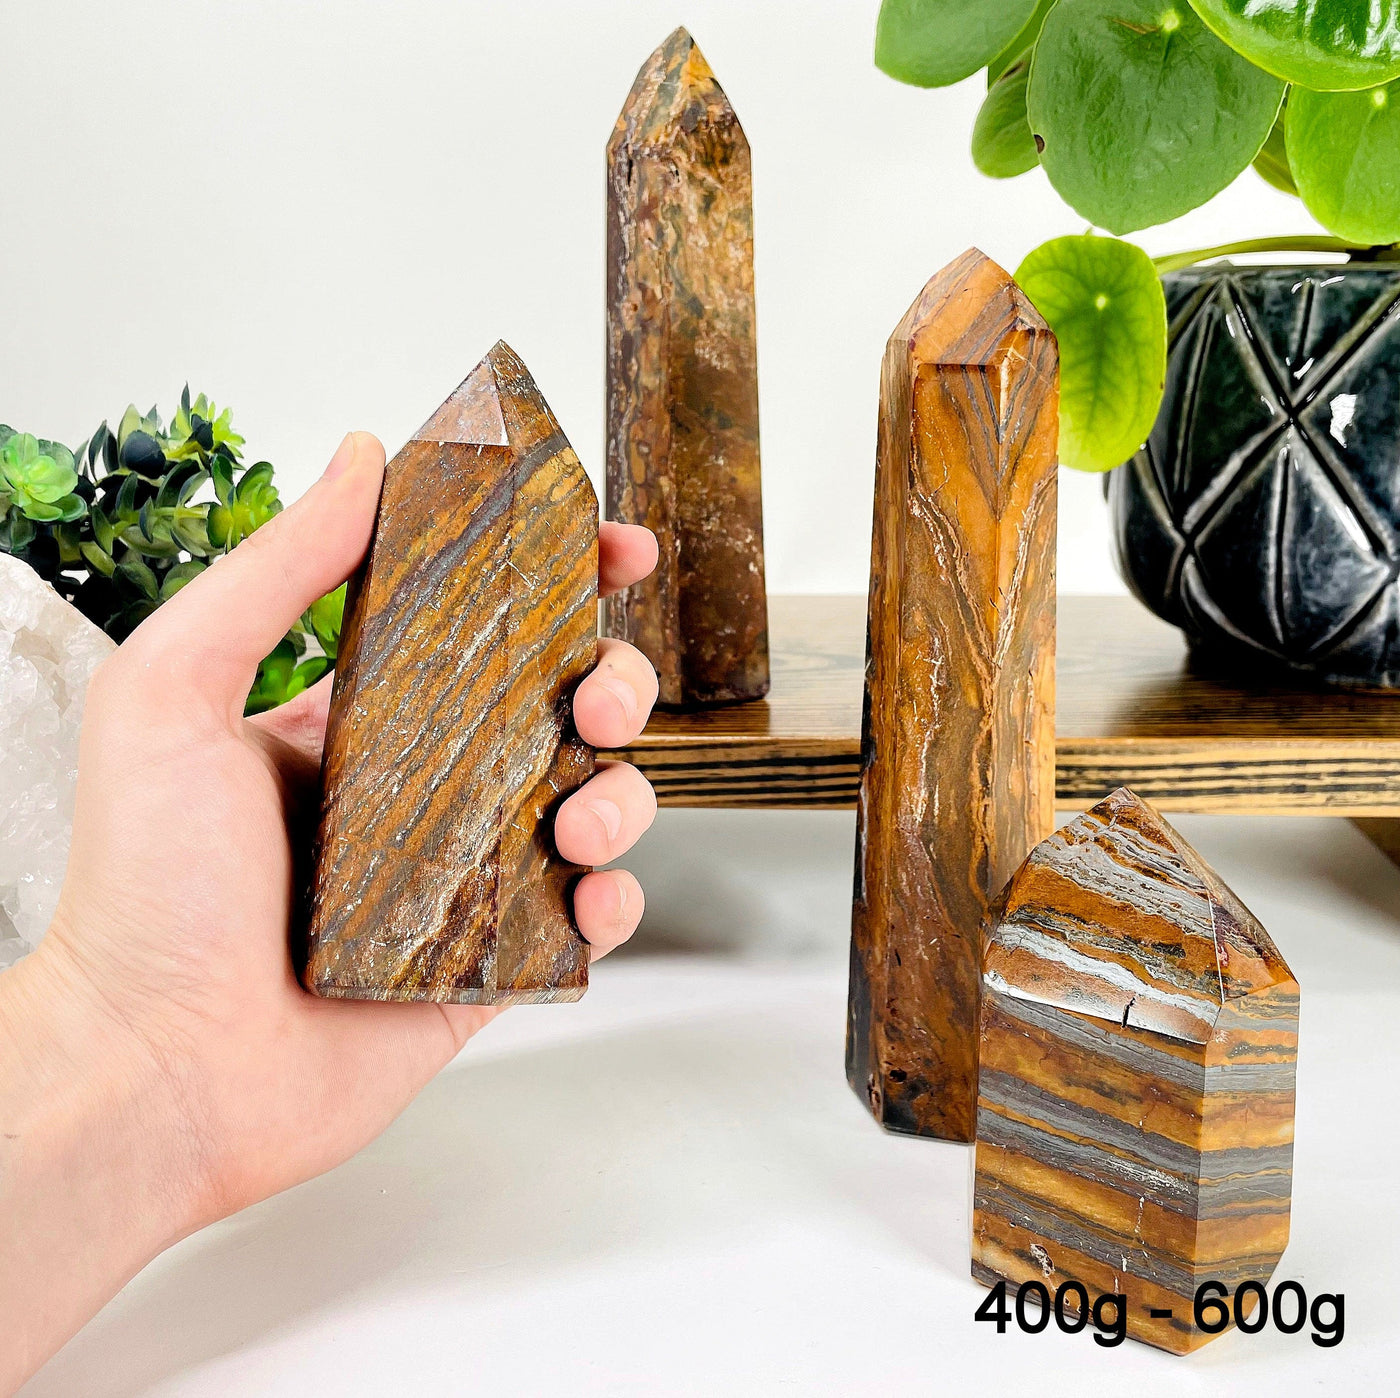 four 400g - 600g tiger eye polished points on display for possible variations with one in hand for size reference